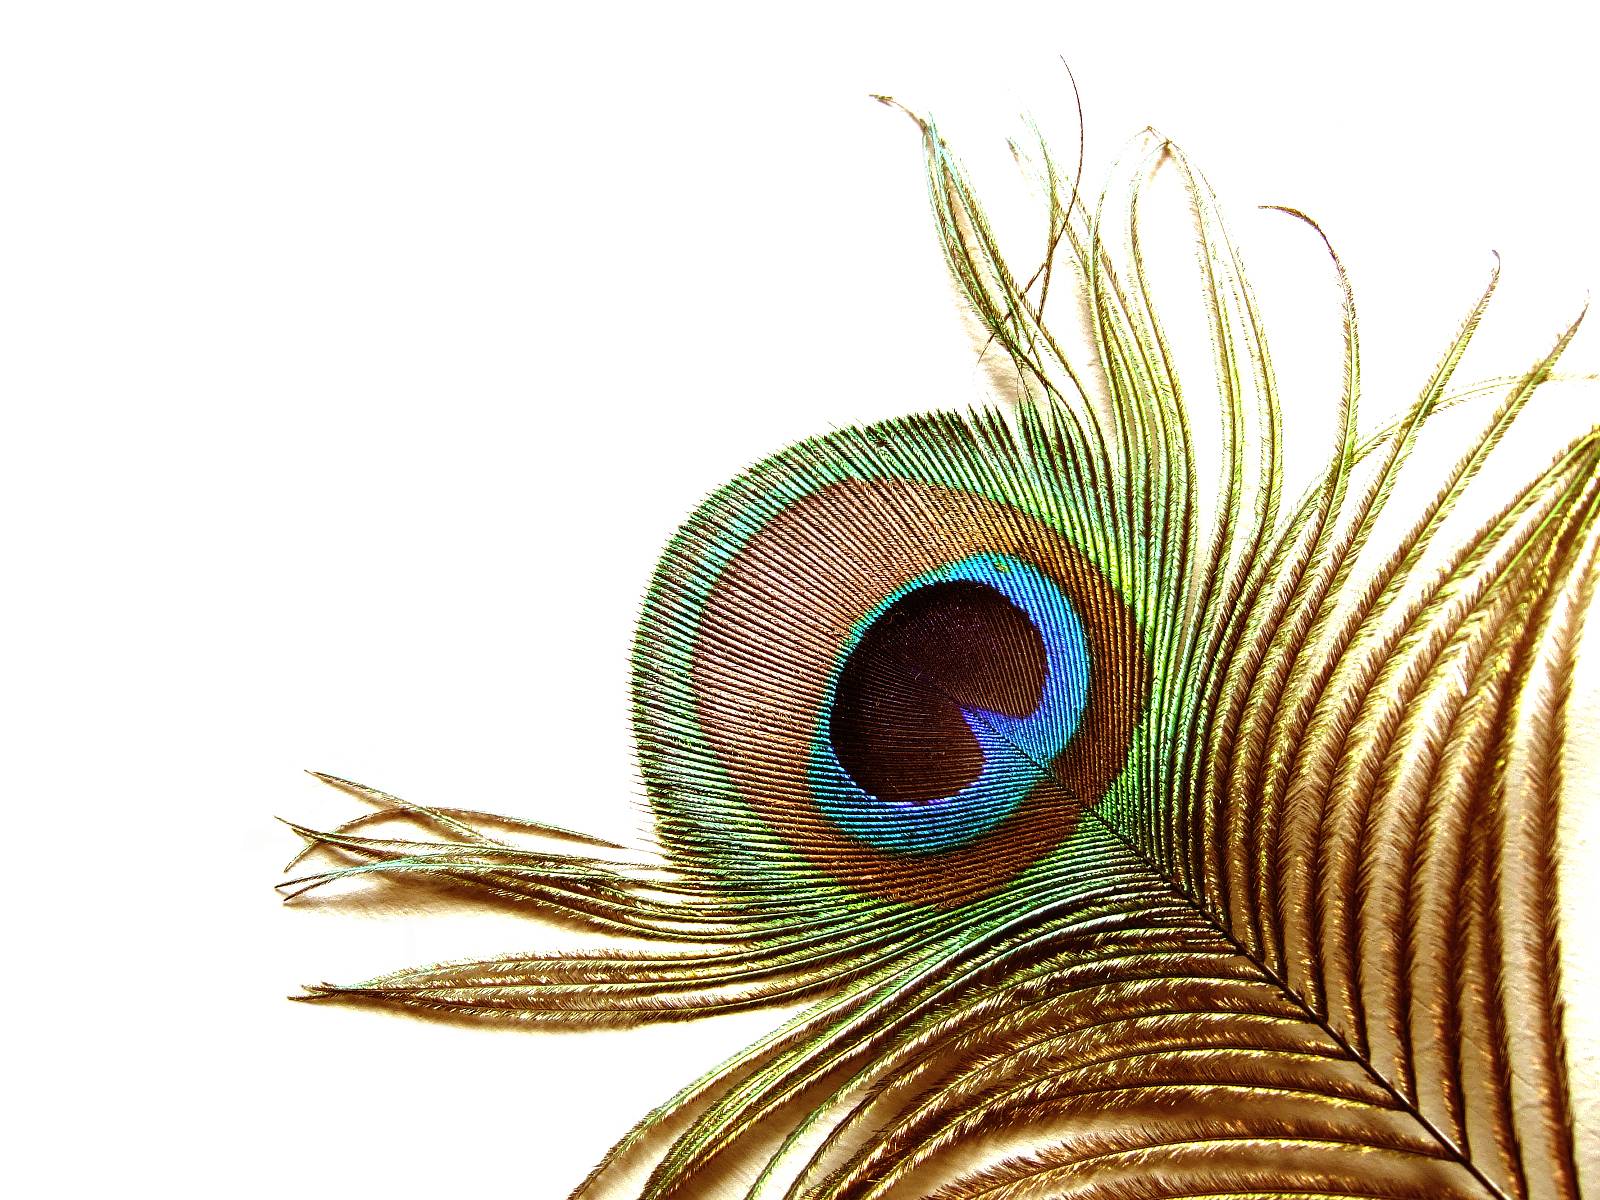 The eye of a peacock PPT Background for Presentation